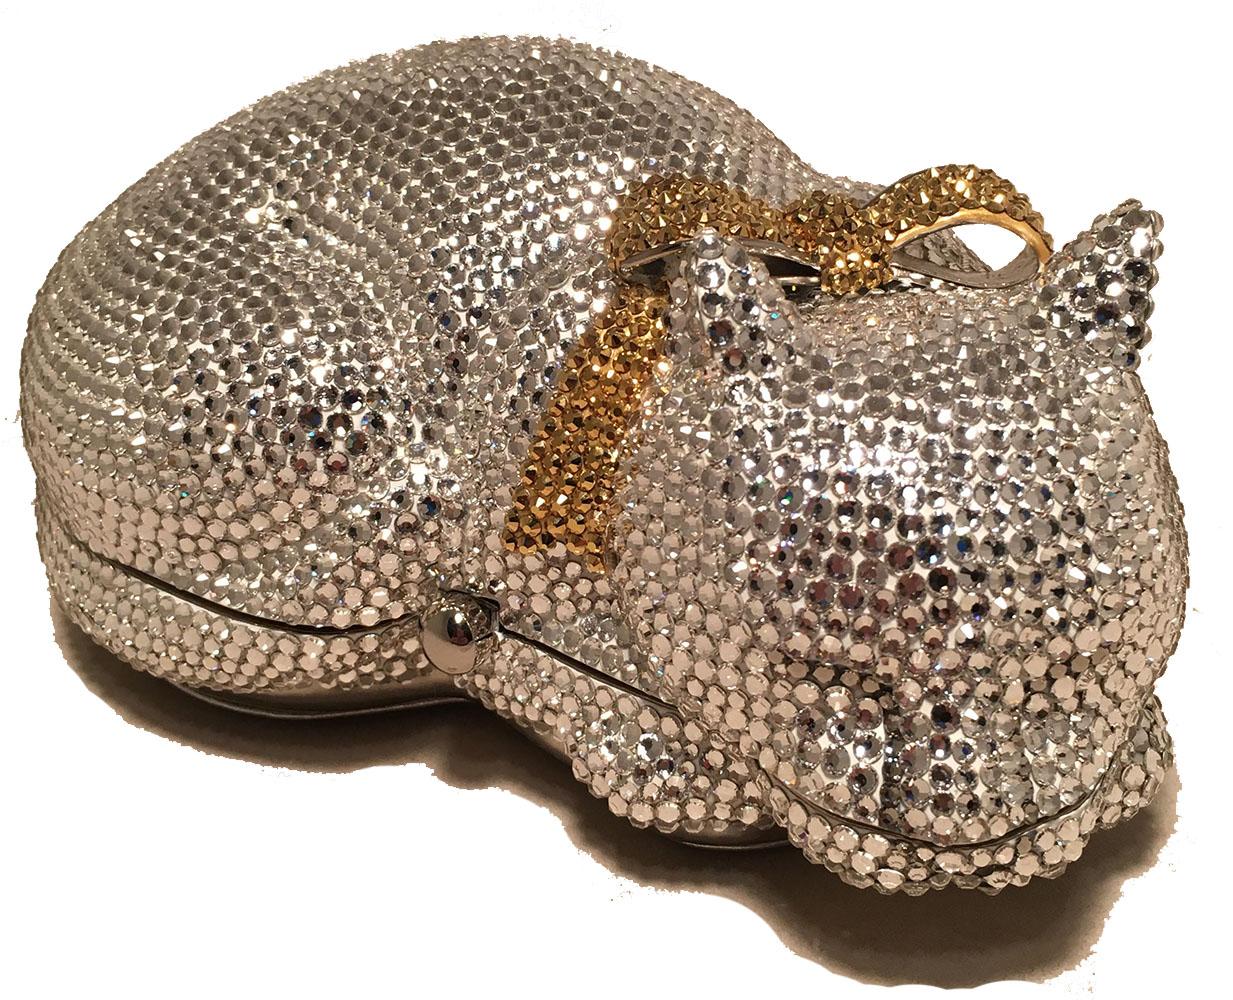 ADORABLE Vintage Judith Leiber cat minaudiere in excellent condition. Clear Swarovski crystal body with a gold crystal bow tie at neck. Silver leather exterior base. Button closure opens to a silver leather lined interior. Excellent condition, no